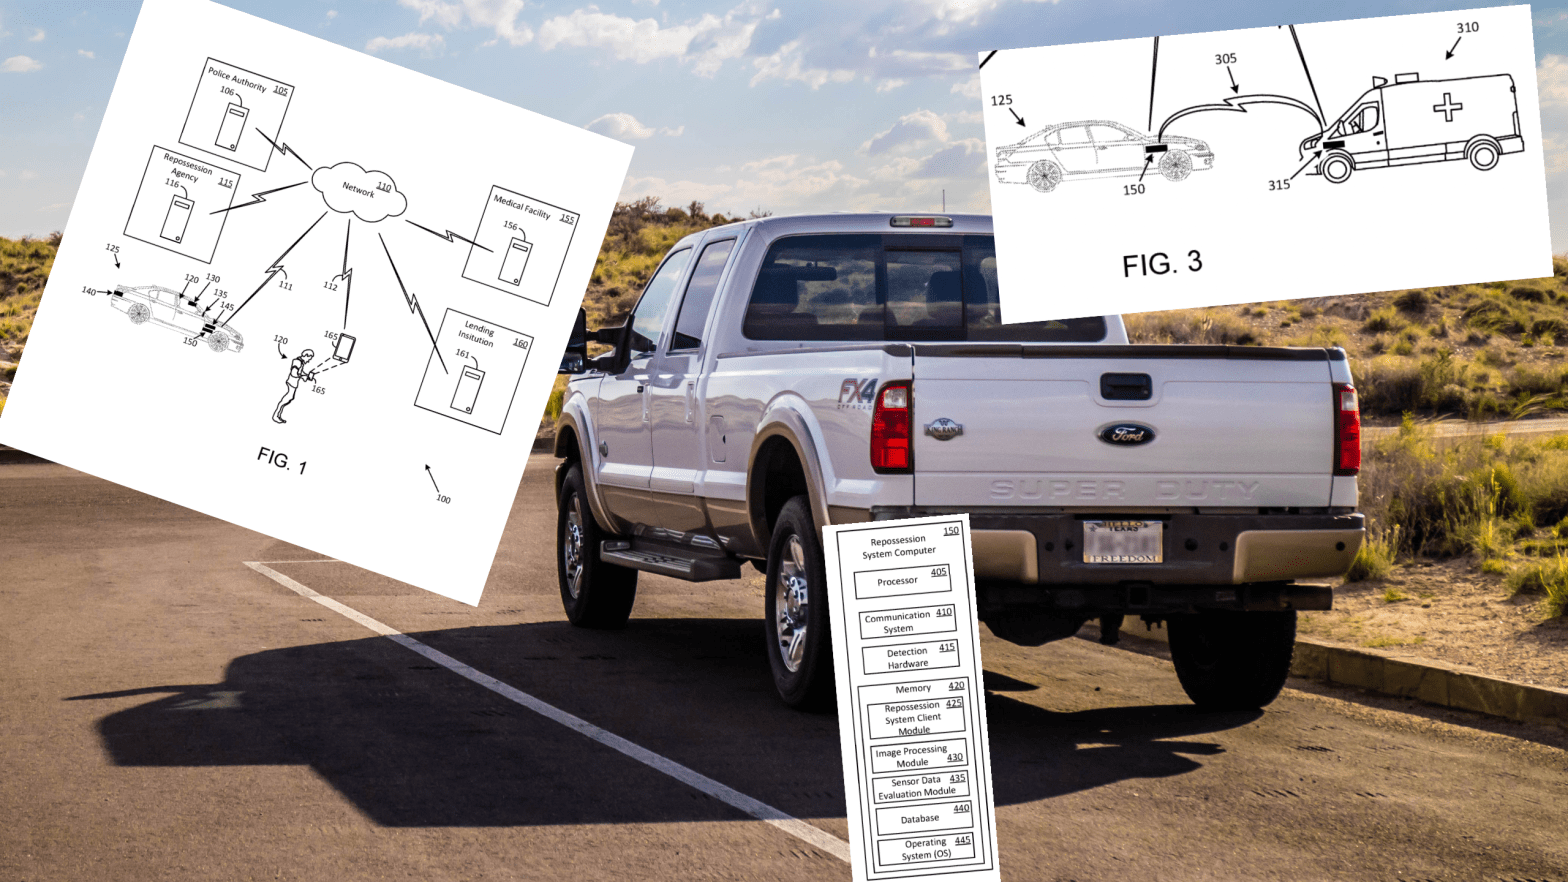 Imagine watching your Ford pickup truck speeding off to deliver itself to a junkyard because you missed one too many car payments. A sampling of the schematics Ford included in its patent application are overlaid above.  (Image: Shutterstock / Gizmodo)